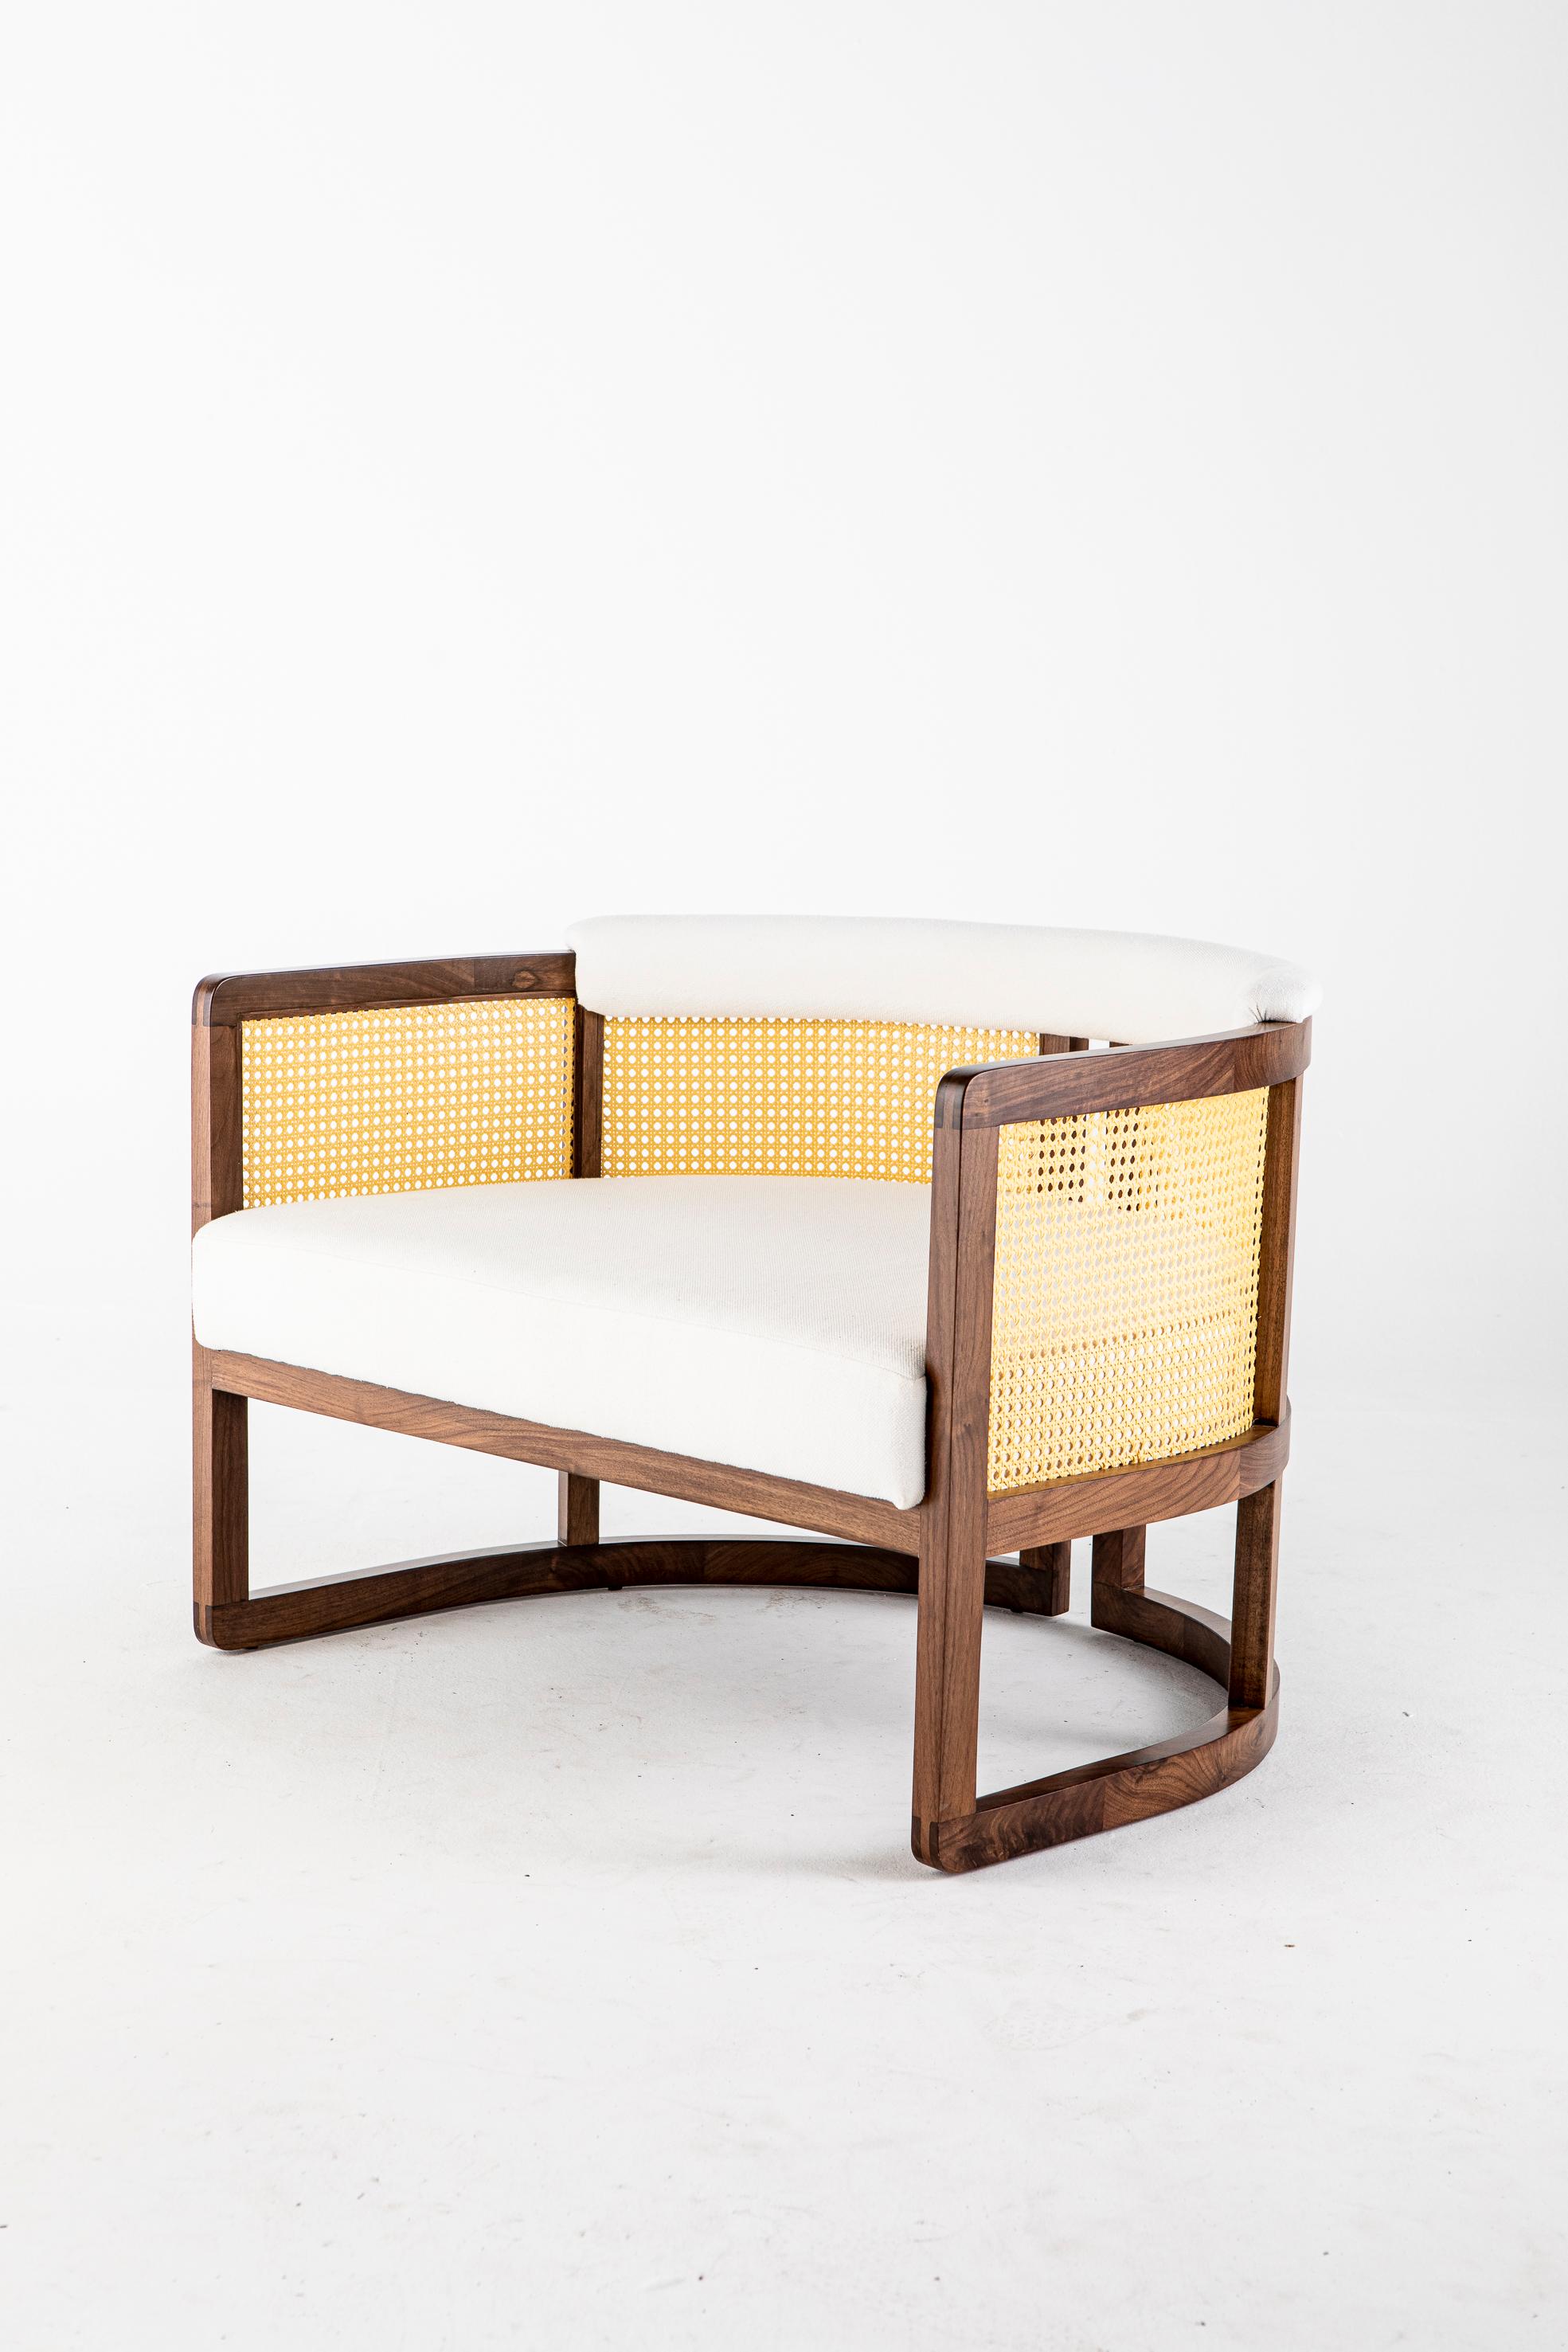 Livingston Lounge Chair by Egg Designs
Dimensions: 92 L X 75 D X 66 H cm
Materials: Walnut Timber, Synthetic Rattan, Brass, Linen Upholstry

Founded by South Africans and life partners, Greg and Roche Dry - Egg is a unique perspective in